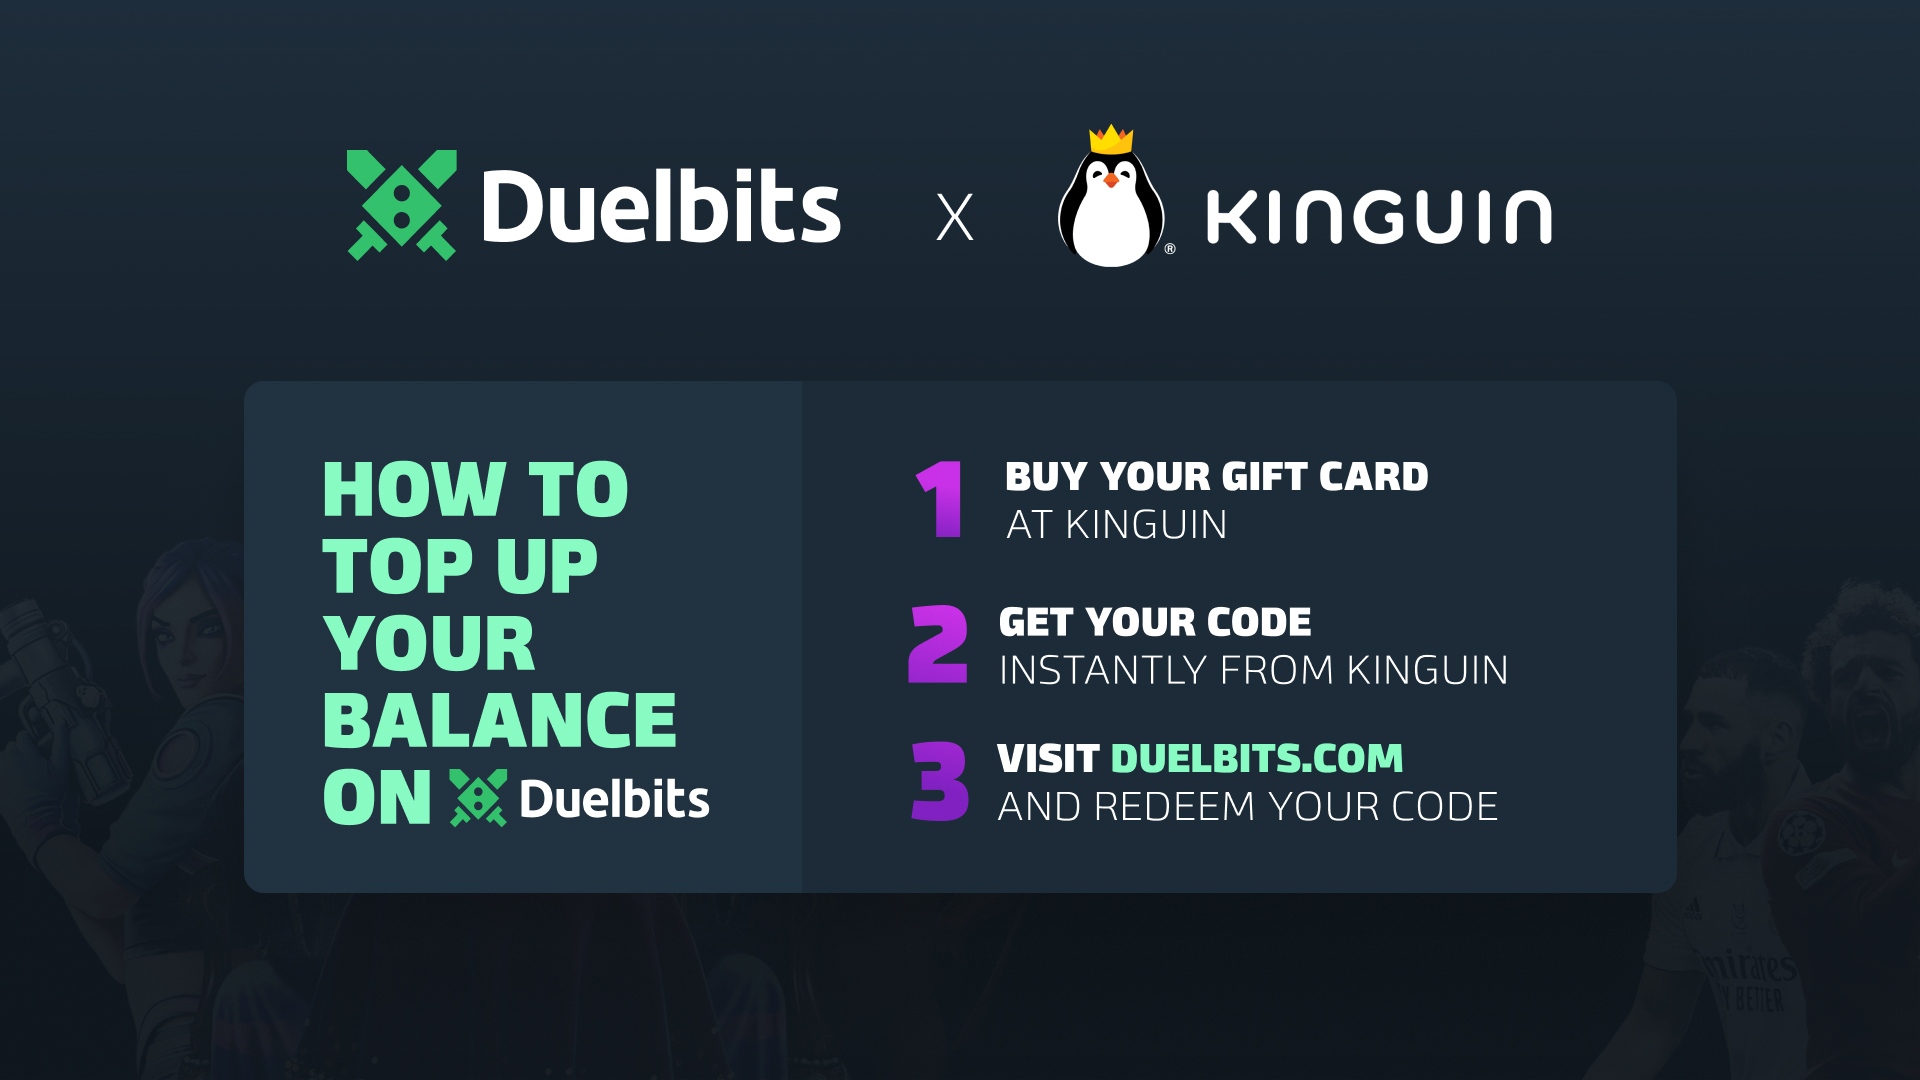 DuelBits $5 Gift Card [$ 6.27]